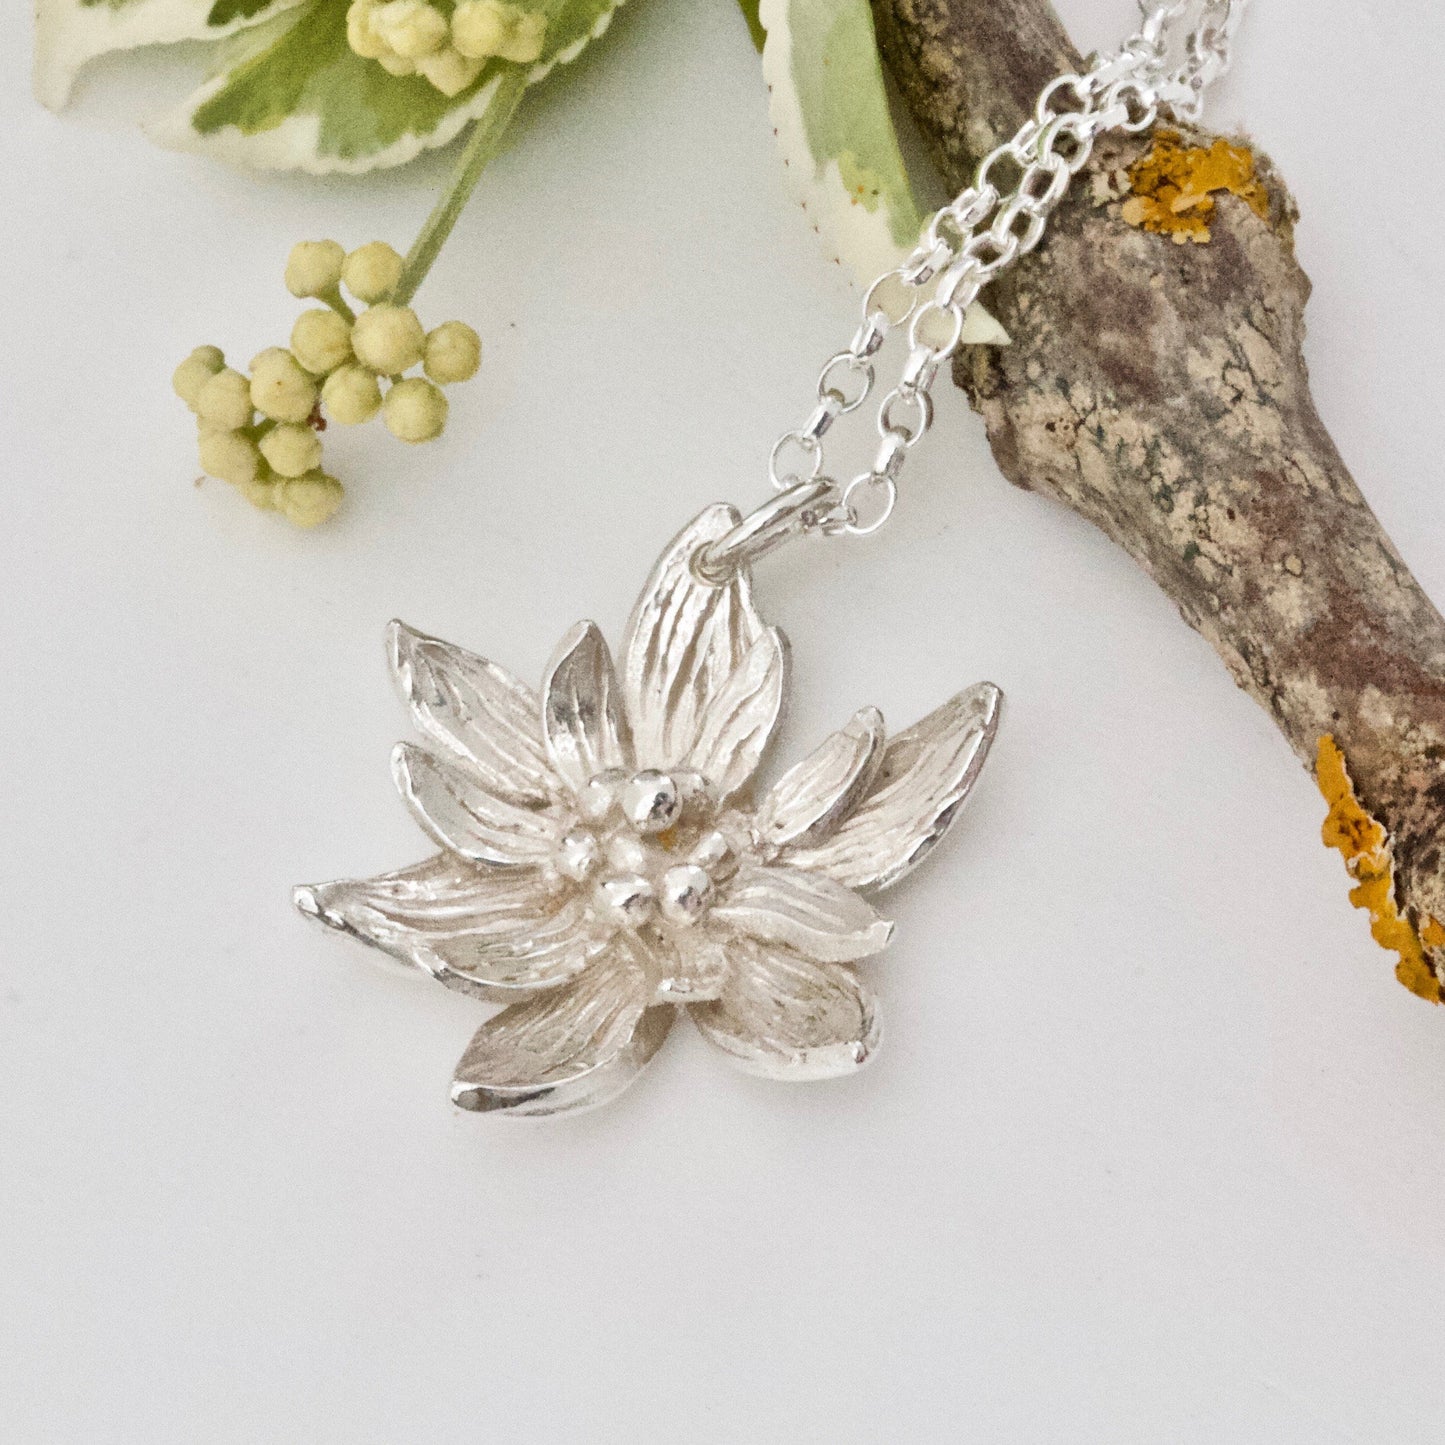 Lotus Flower Necklace, Sterling Silver, Yoga Jewellery